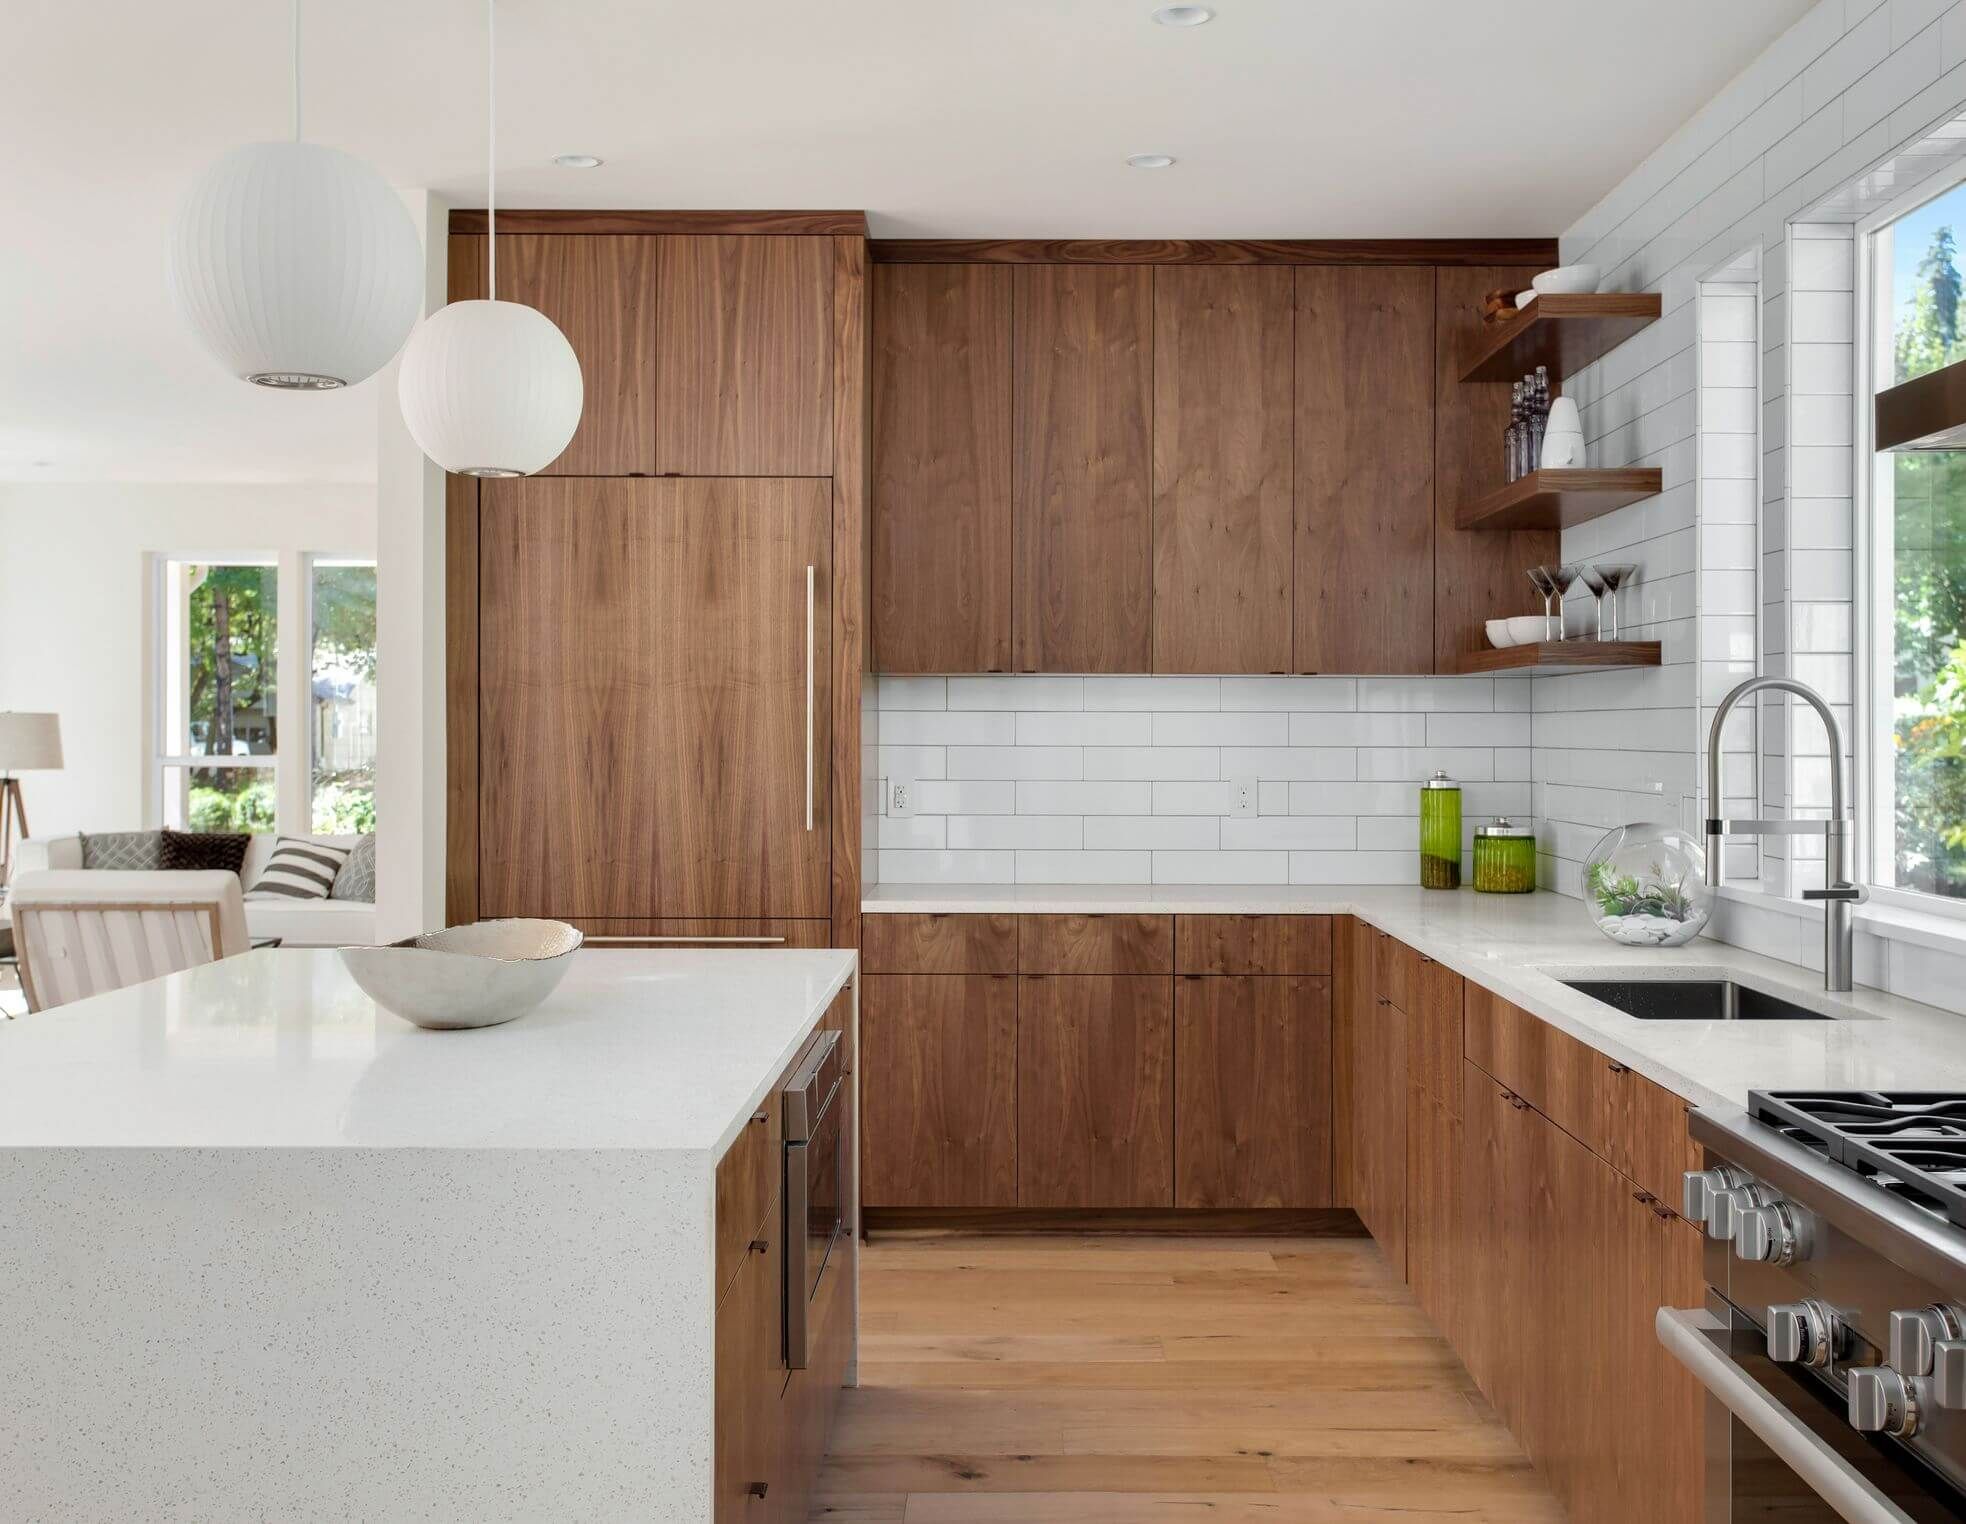 What Is An L Shaped Kitchen Layout Caandesign Architecture And Home Design Blog